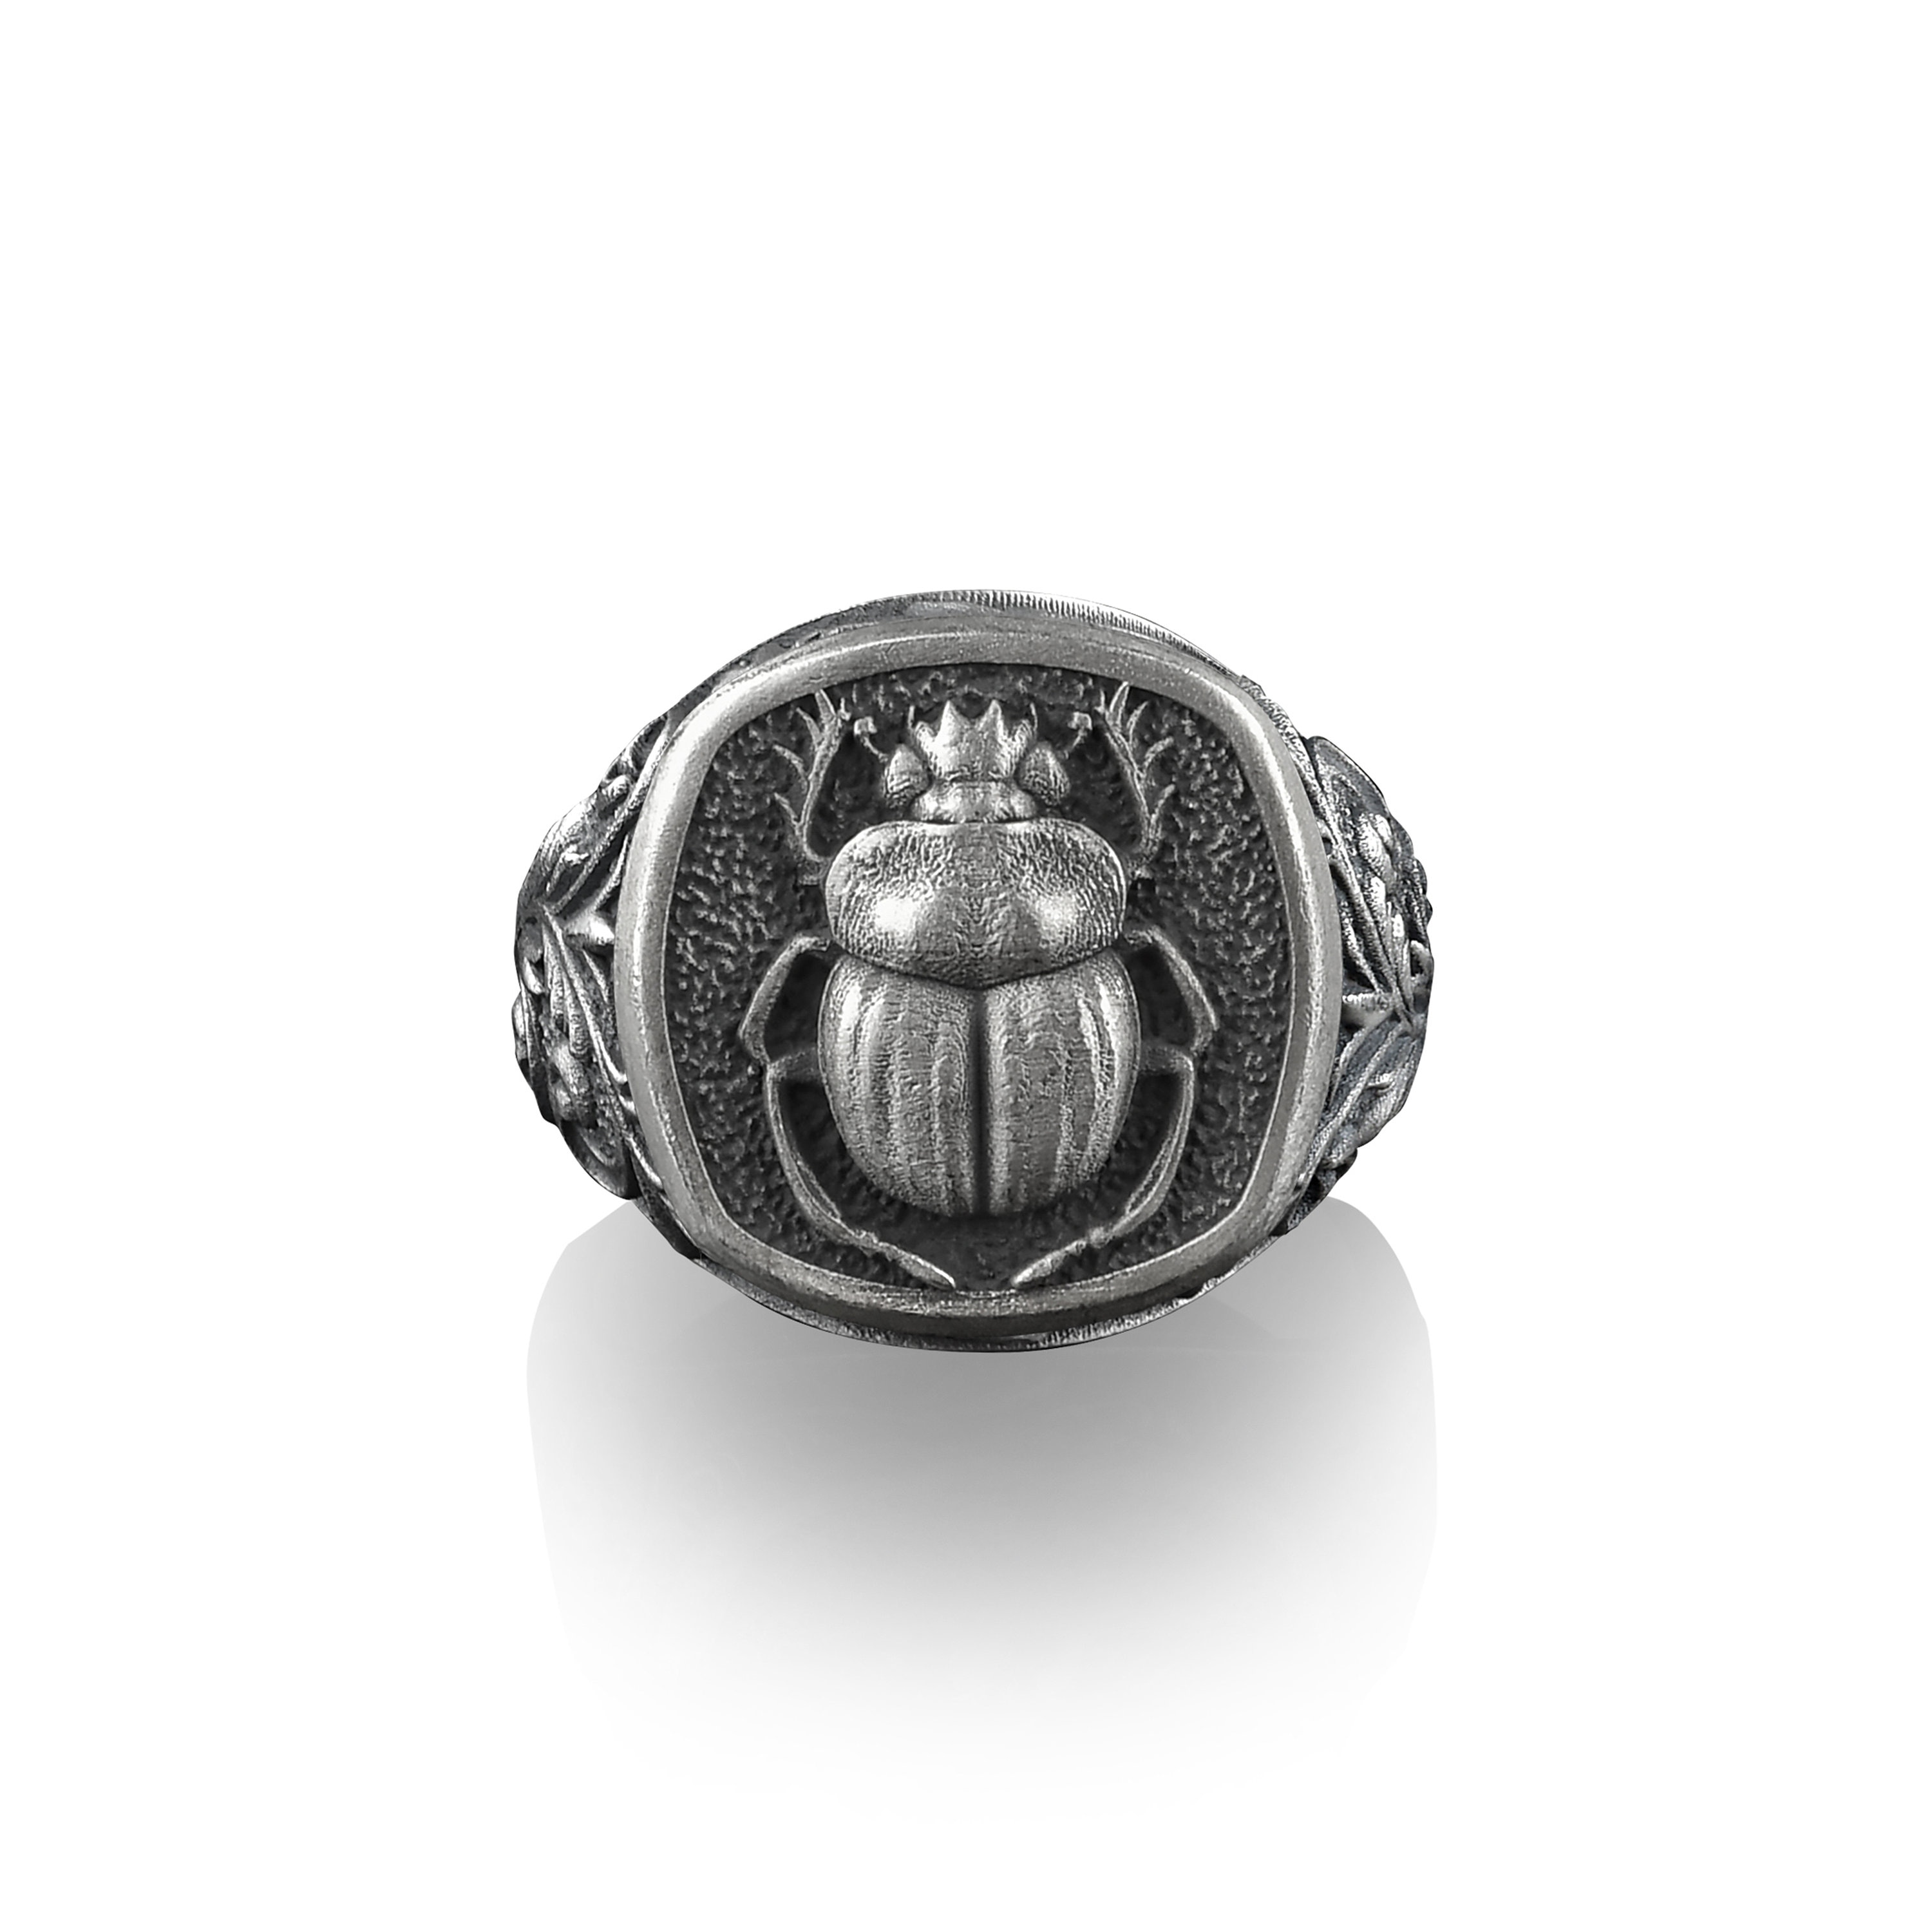 Discover the Exquisite Sterling Silver Ankh and Scarab Beetle Ring